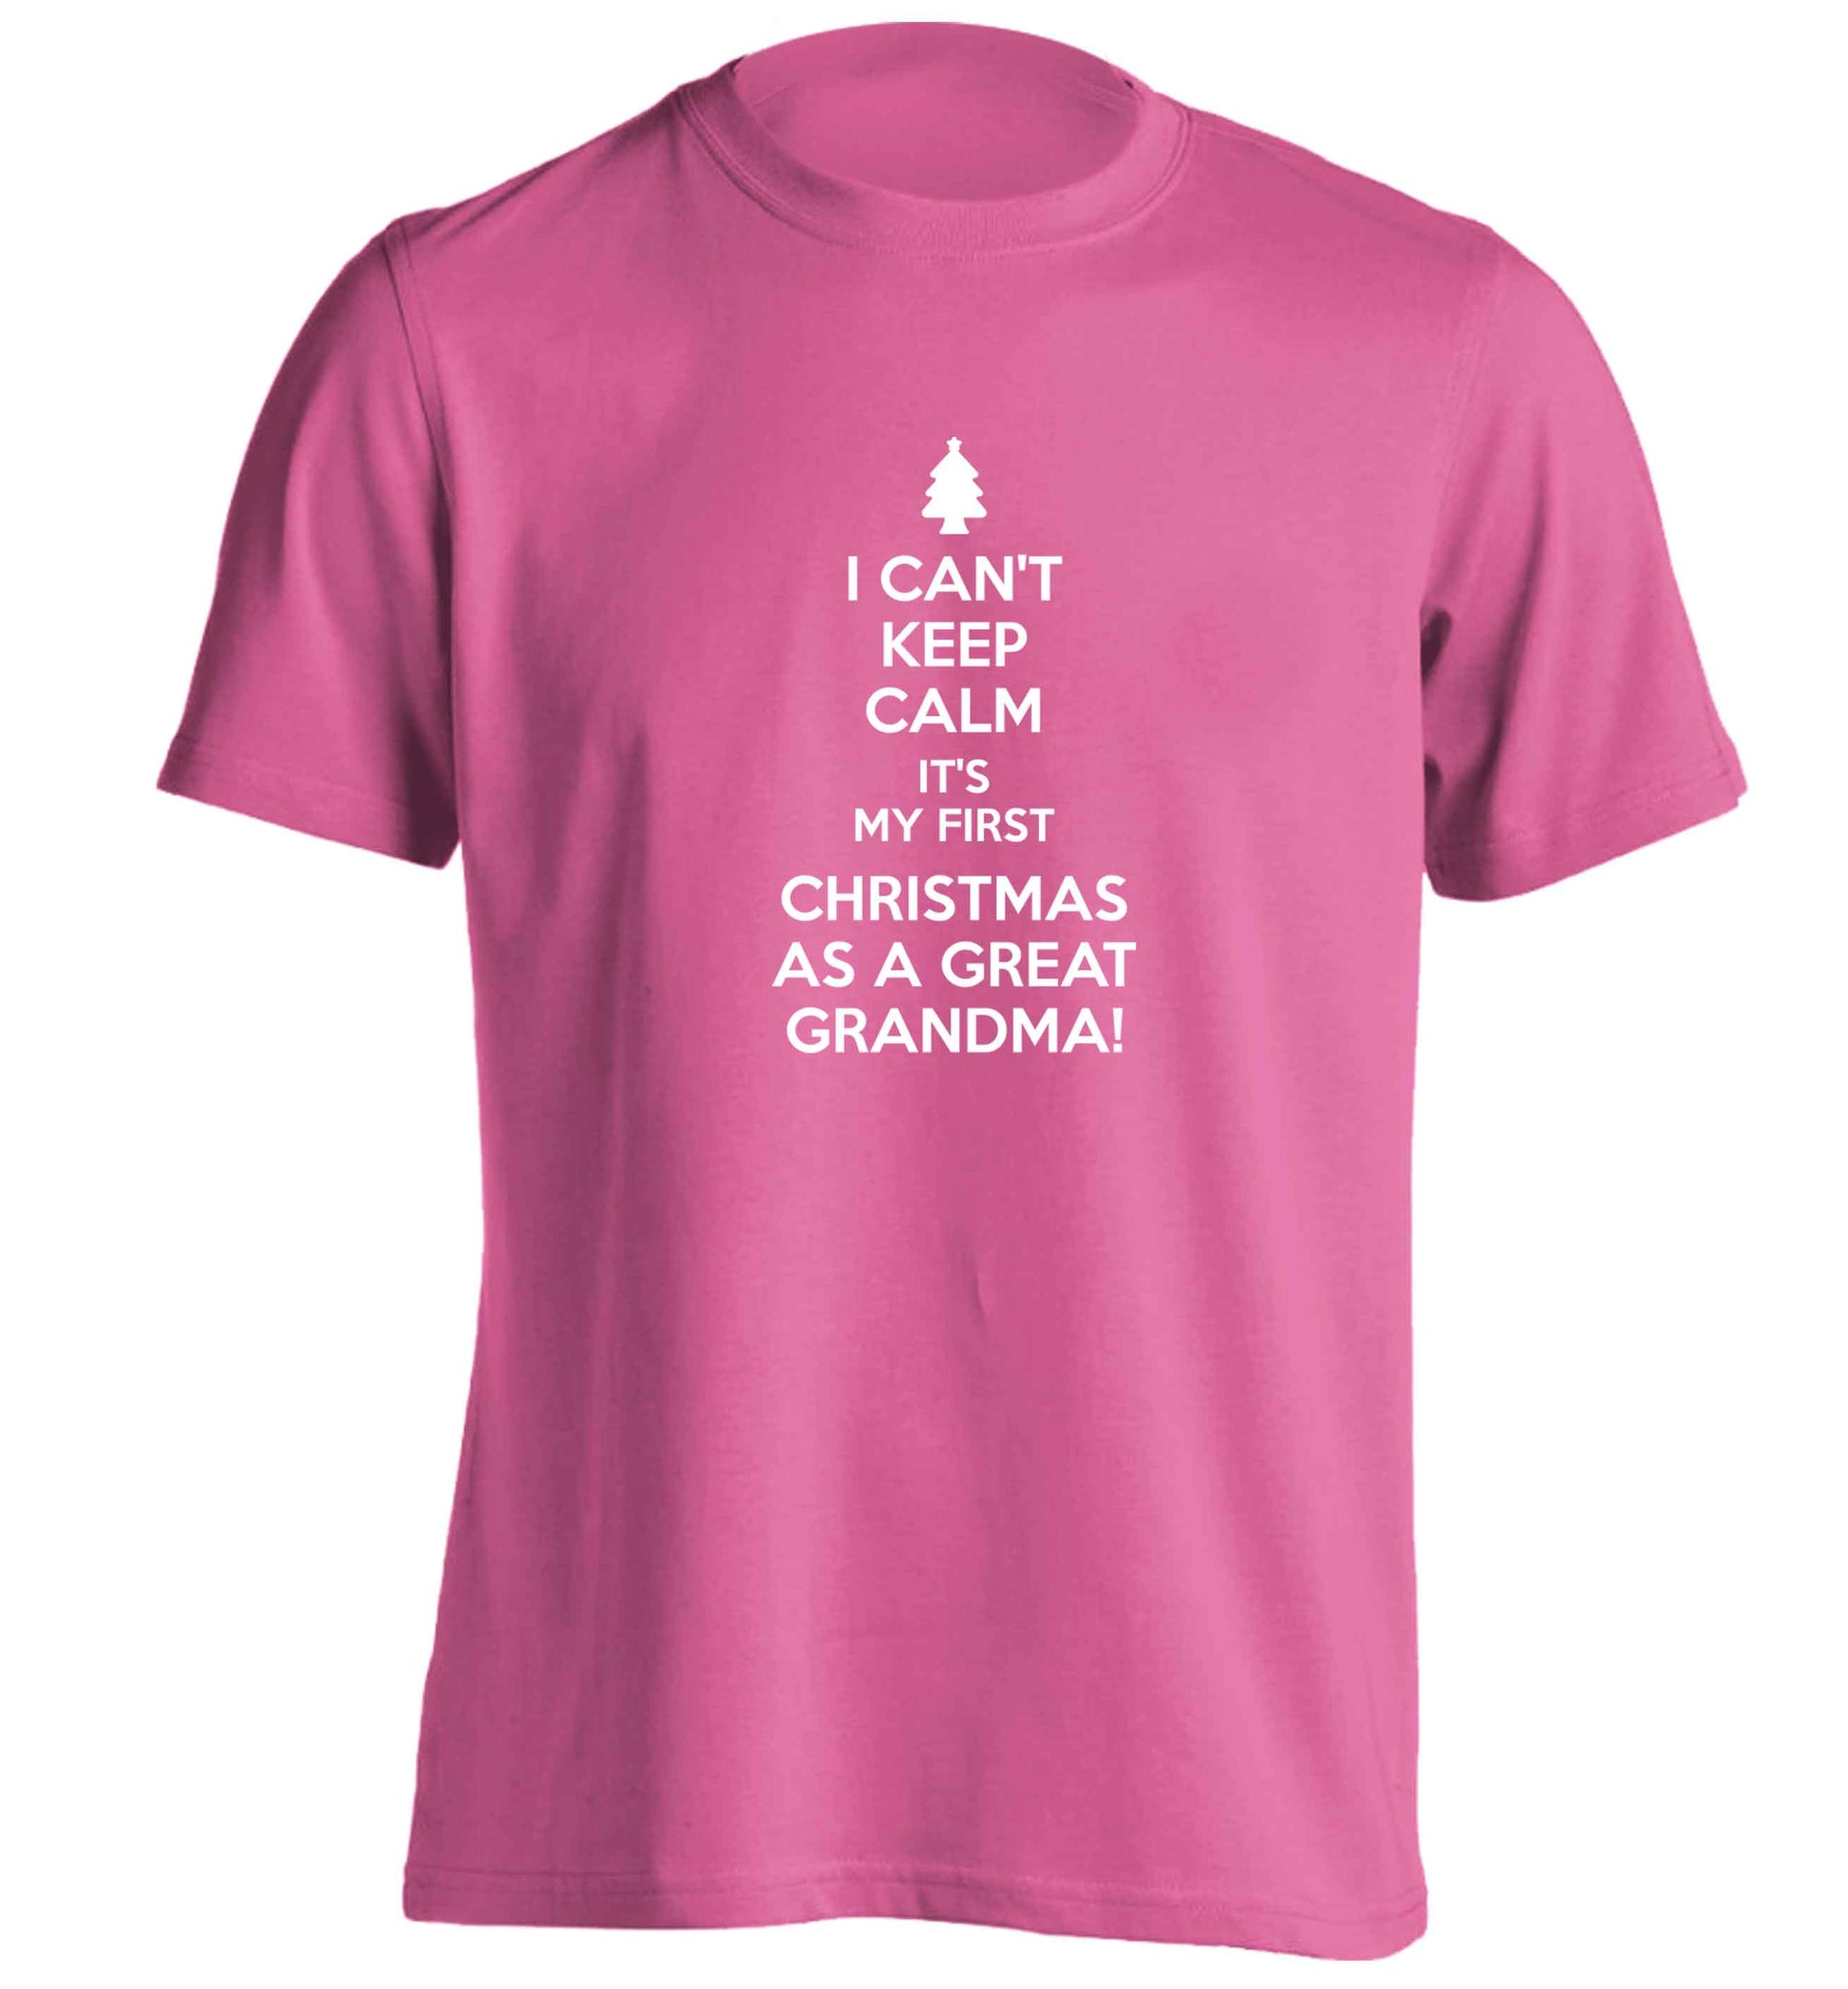 I can't keep calm it's my first Christmas as a great grandma! adults unisex pink Tshirt 2XL